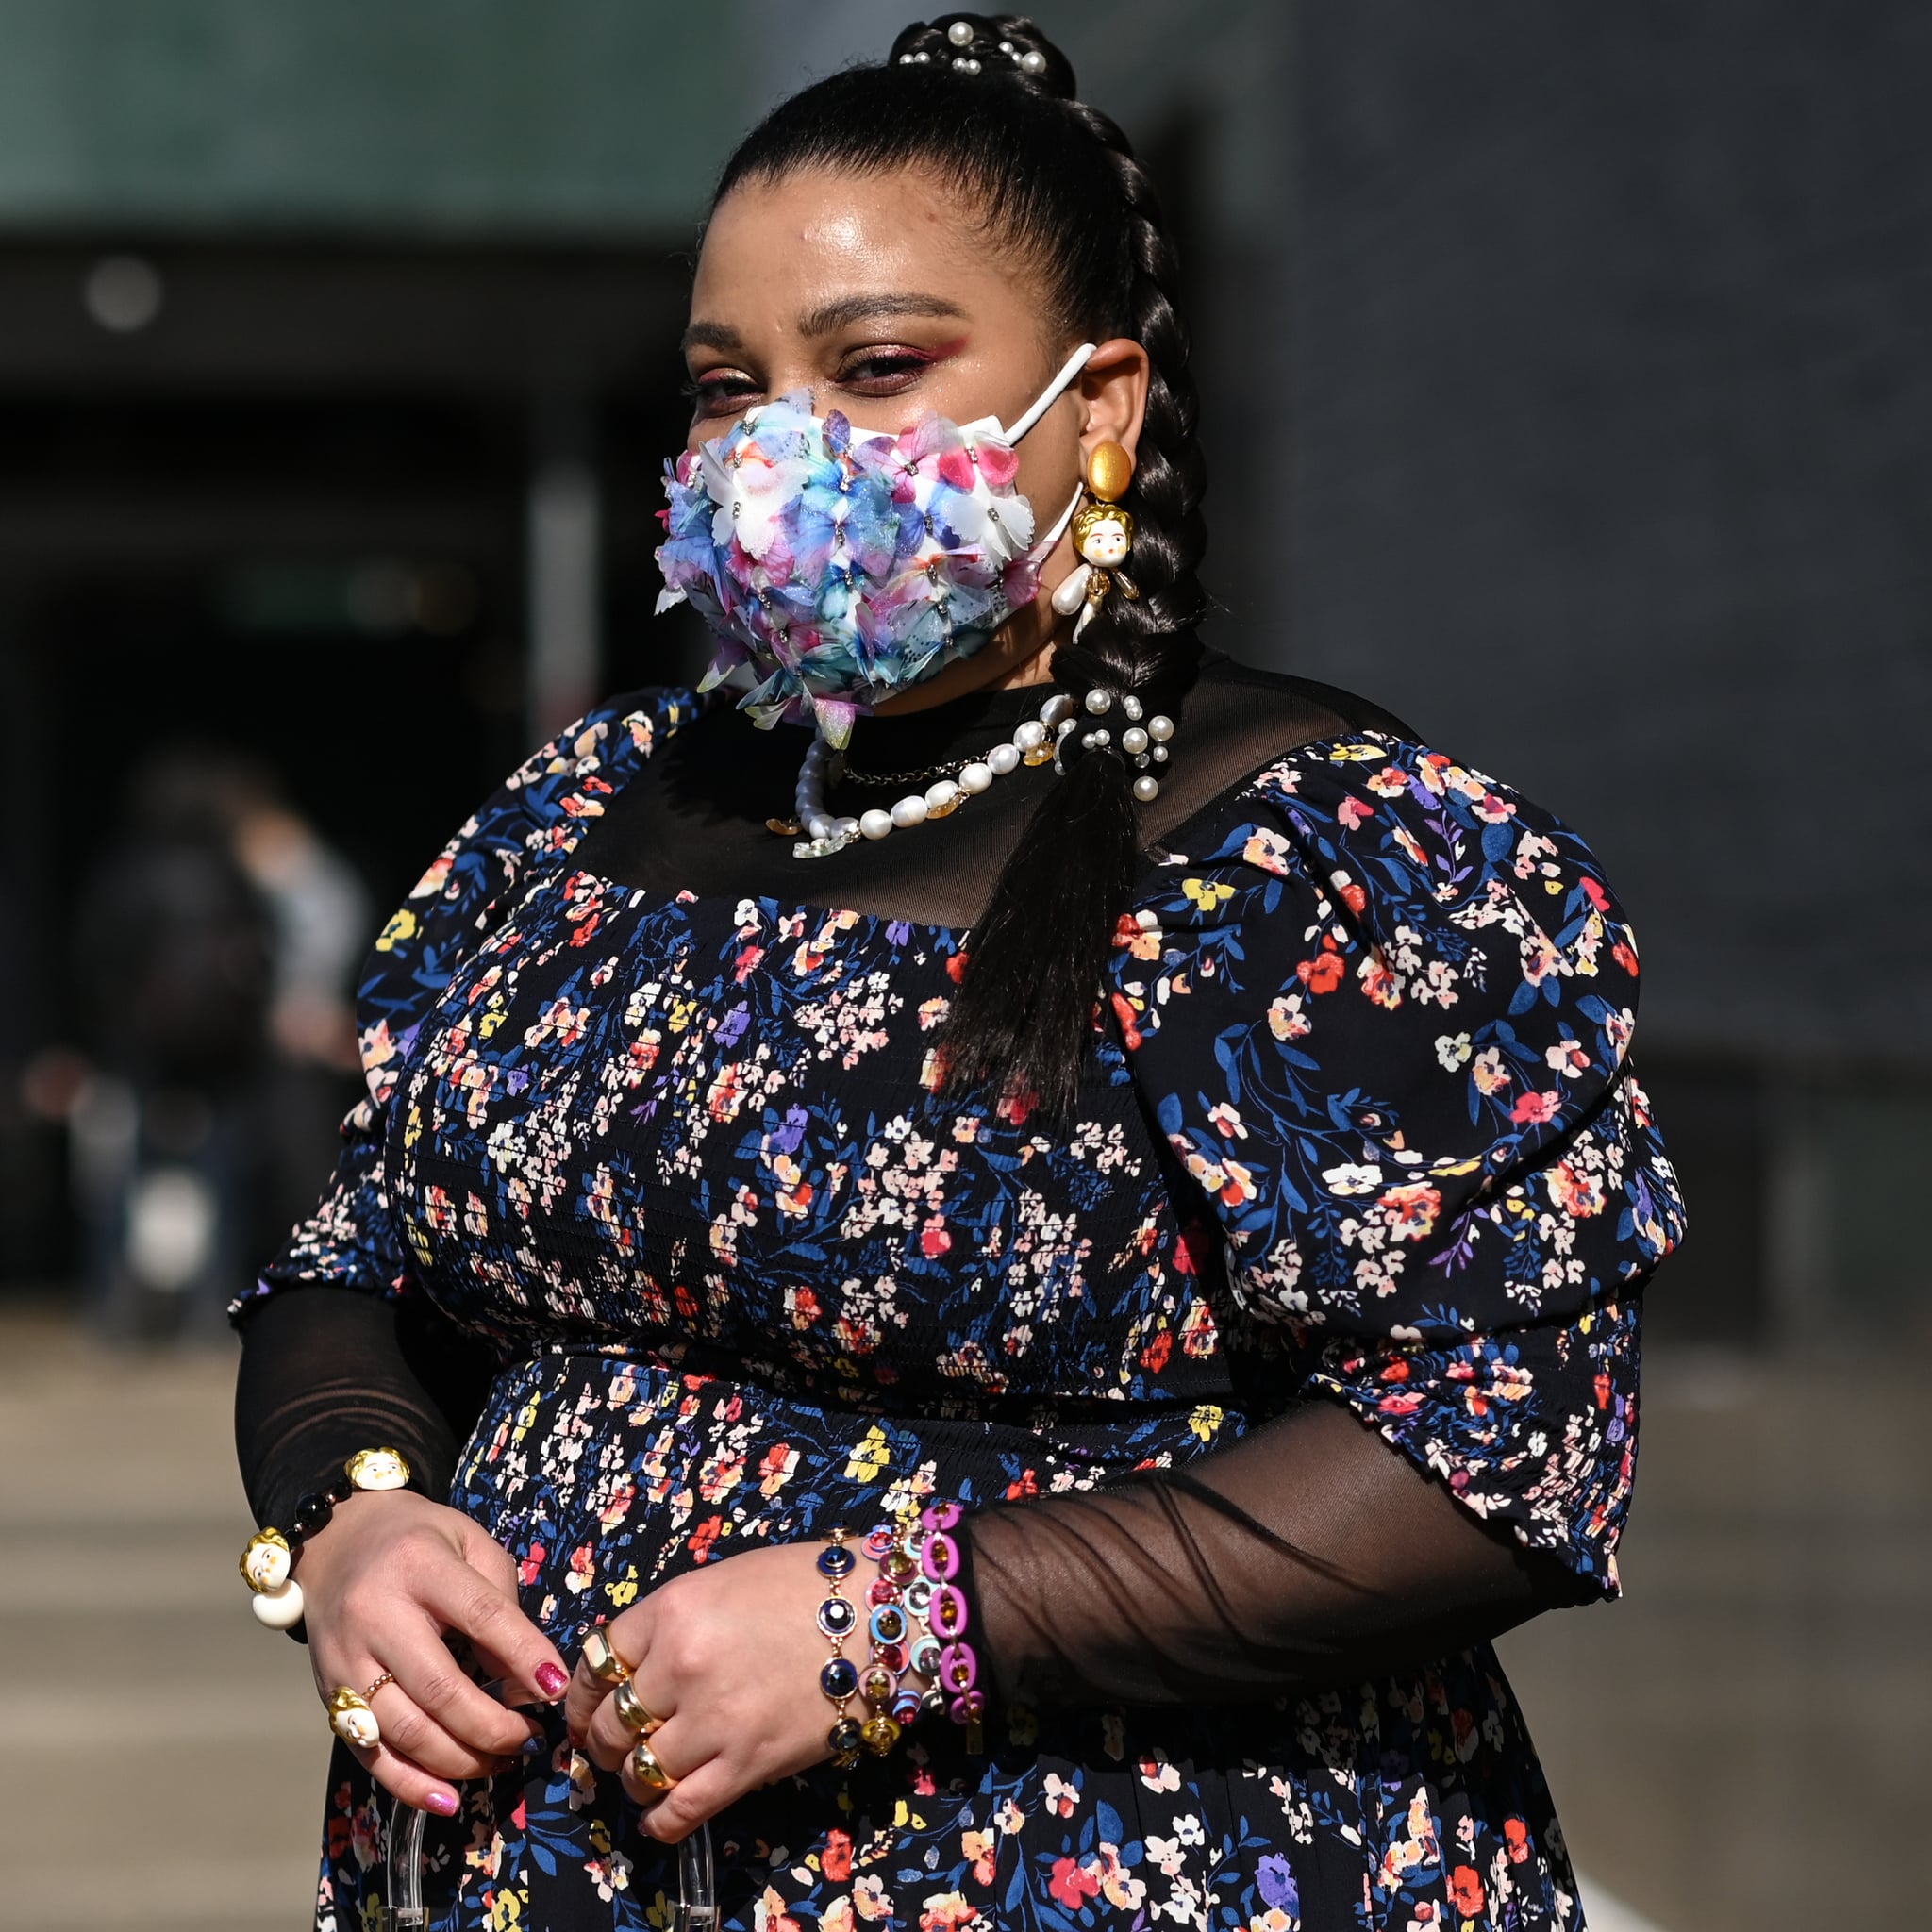 Street Style Outfits With Face Masks at Fashion Week POPSUGAR